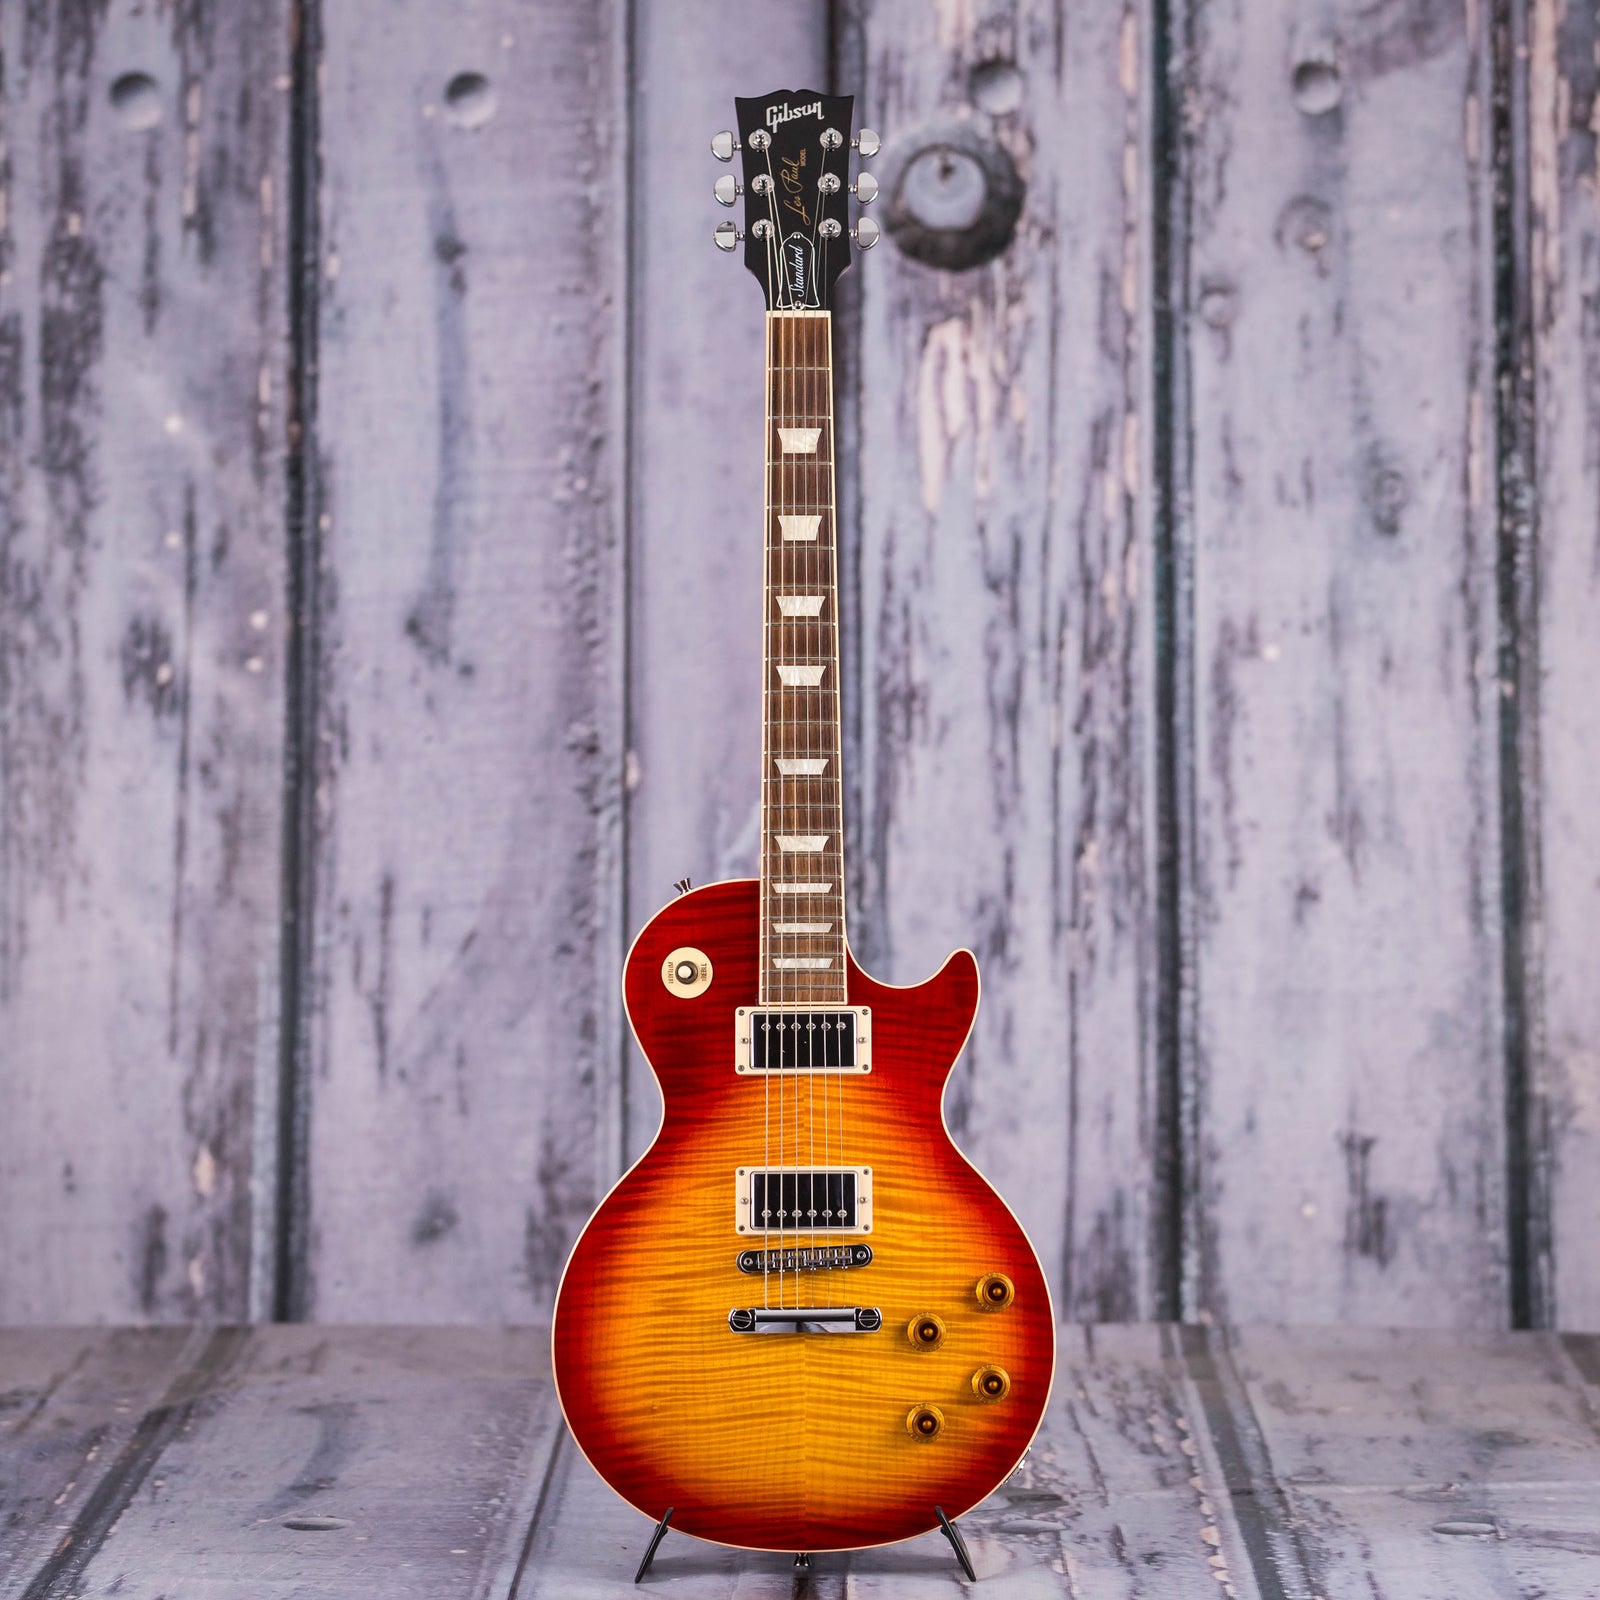 Used 2018 Gibson Usa Les Paul Standard Heritage Cherry Sunburst For Sale Replay Guitar 4556